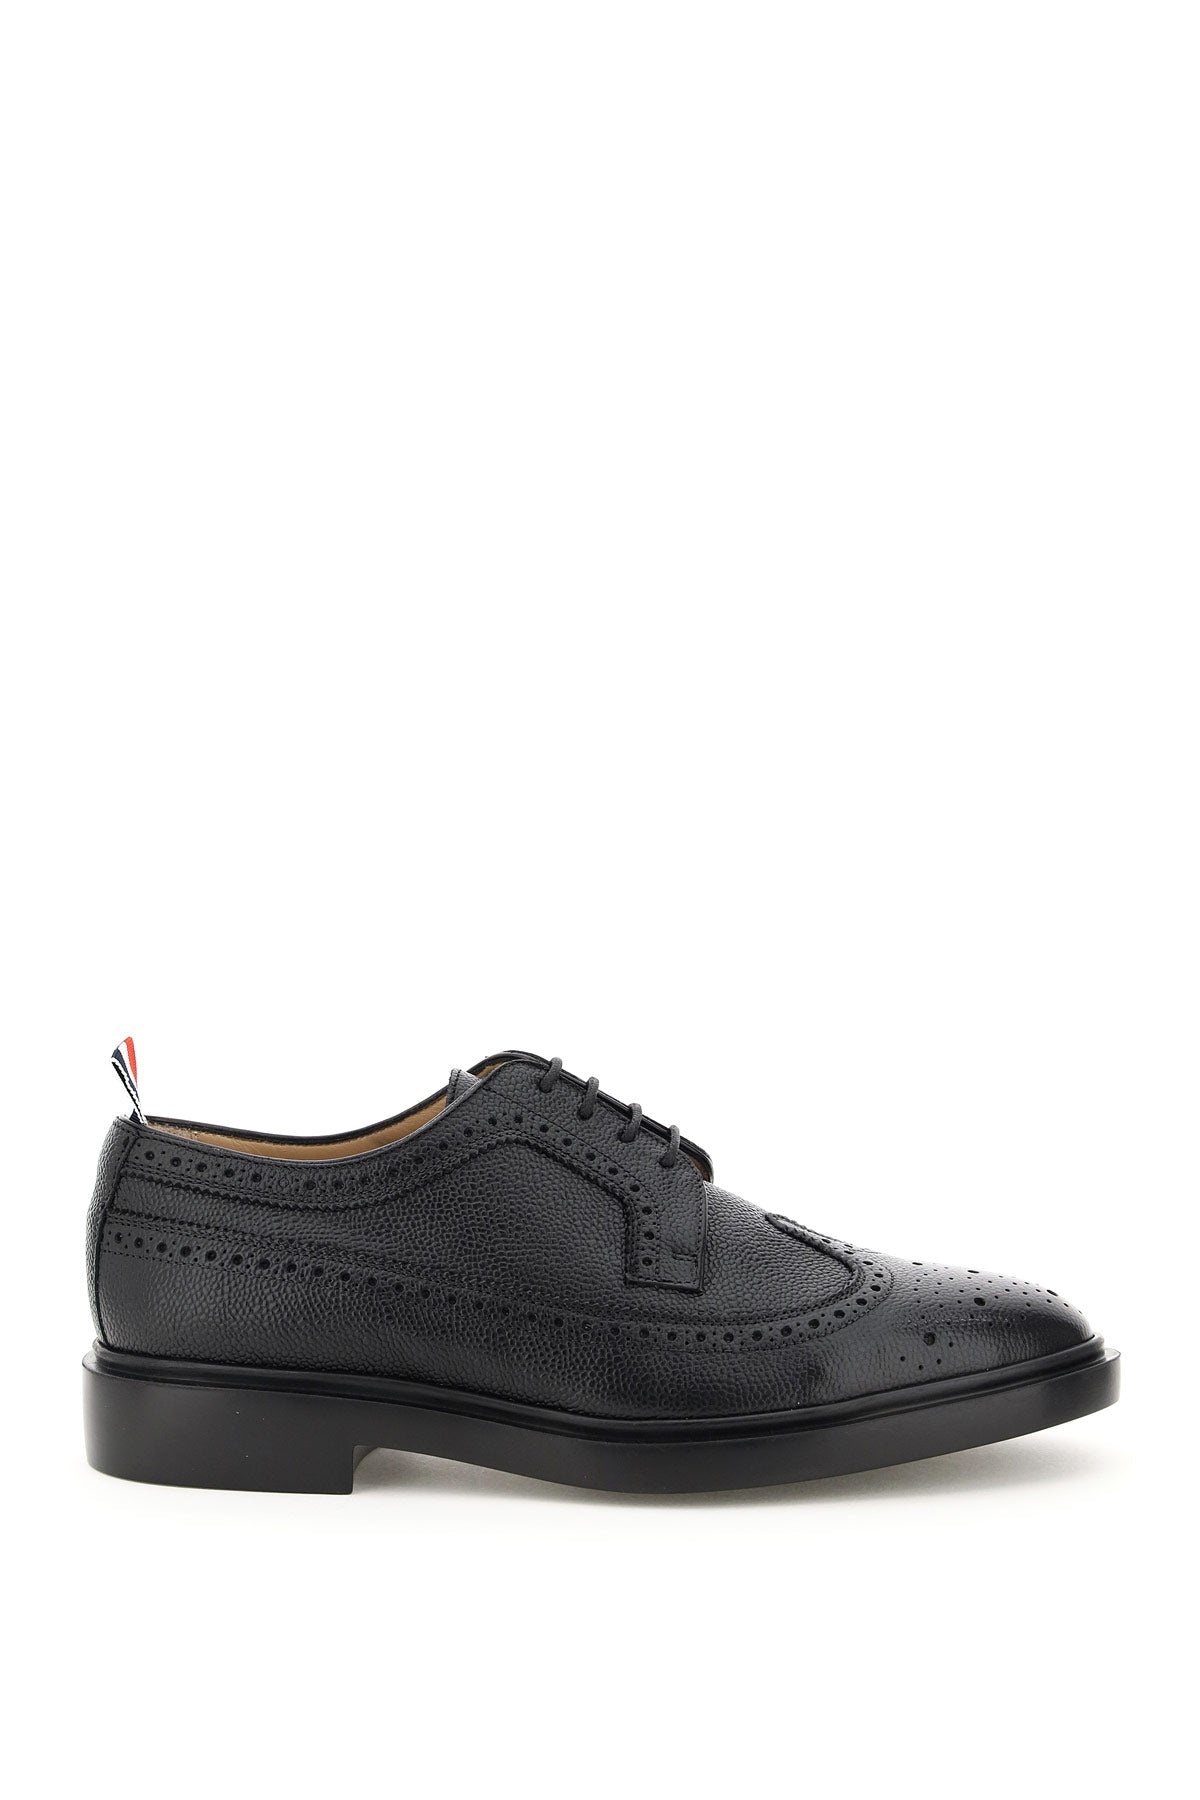 Thom Browne Longwing Brogue Lace-Up Shoes Men - 1